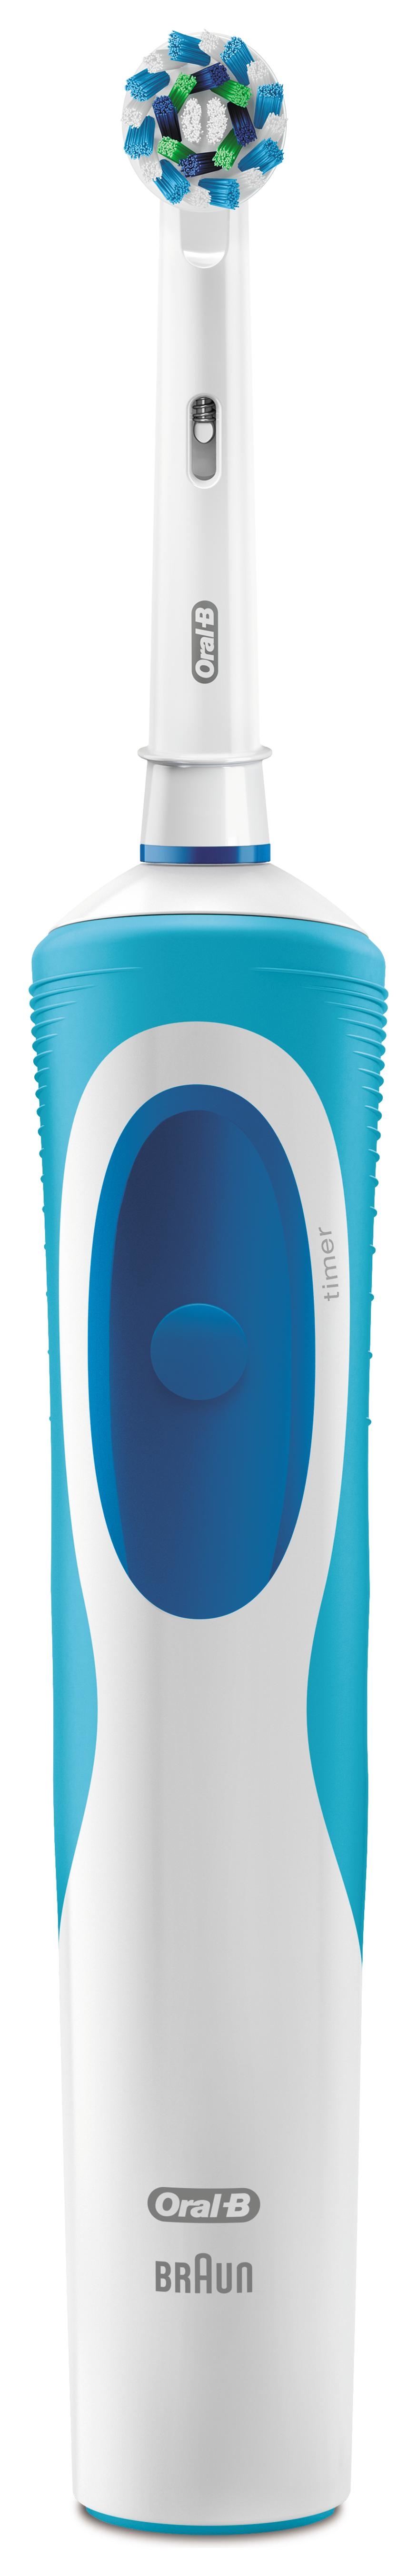 Image of Oral B Vitality cross action